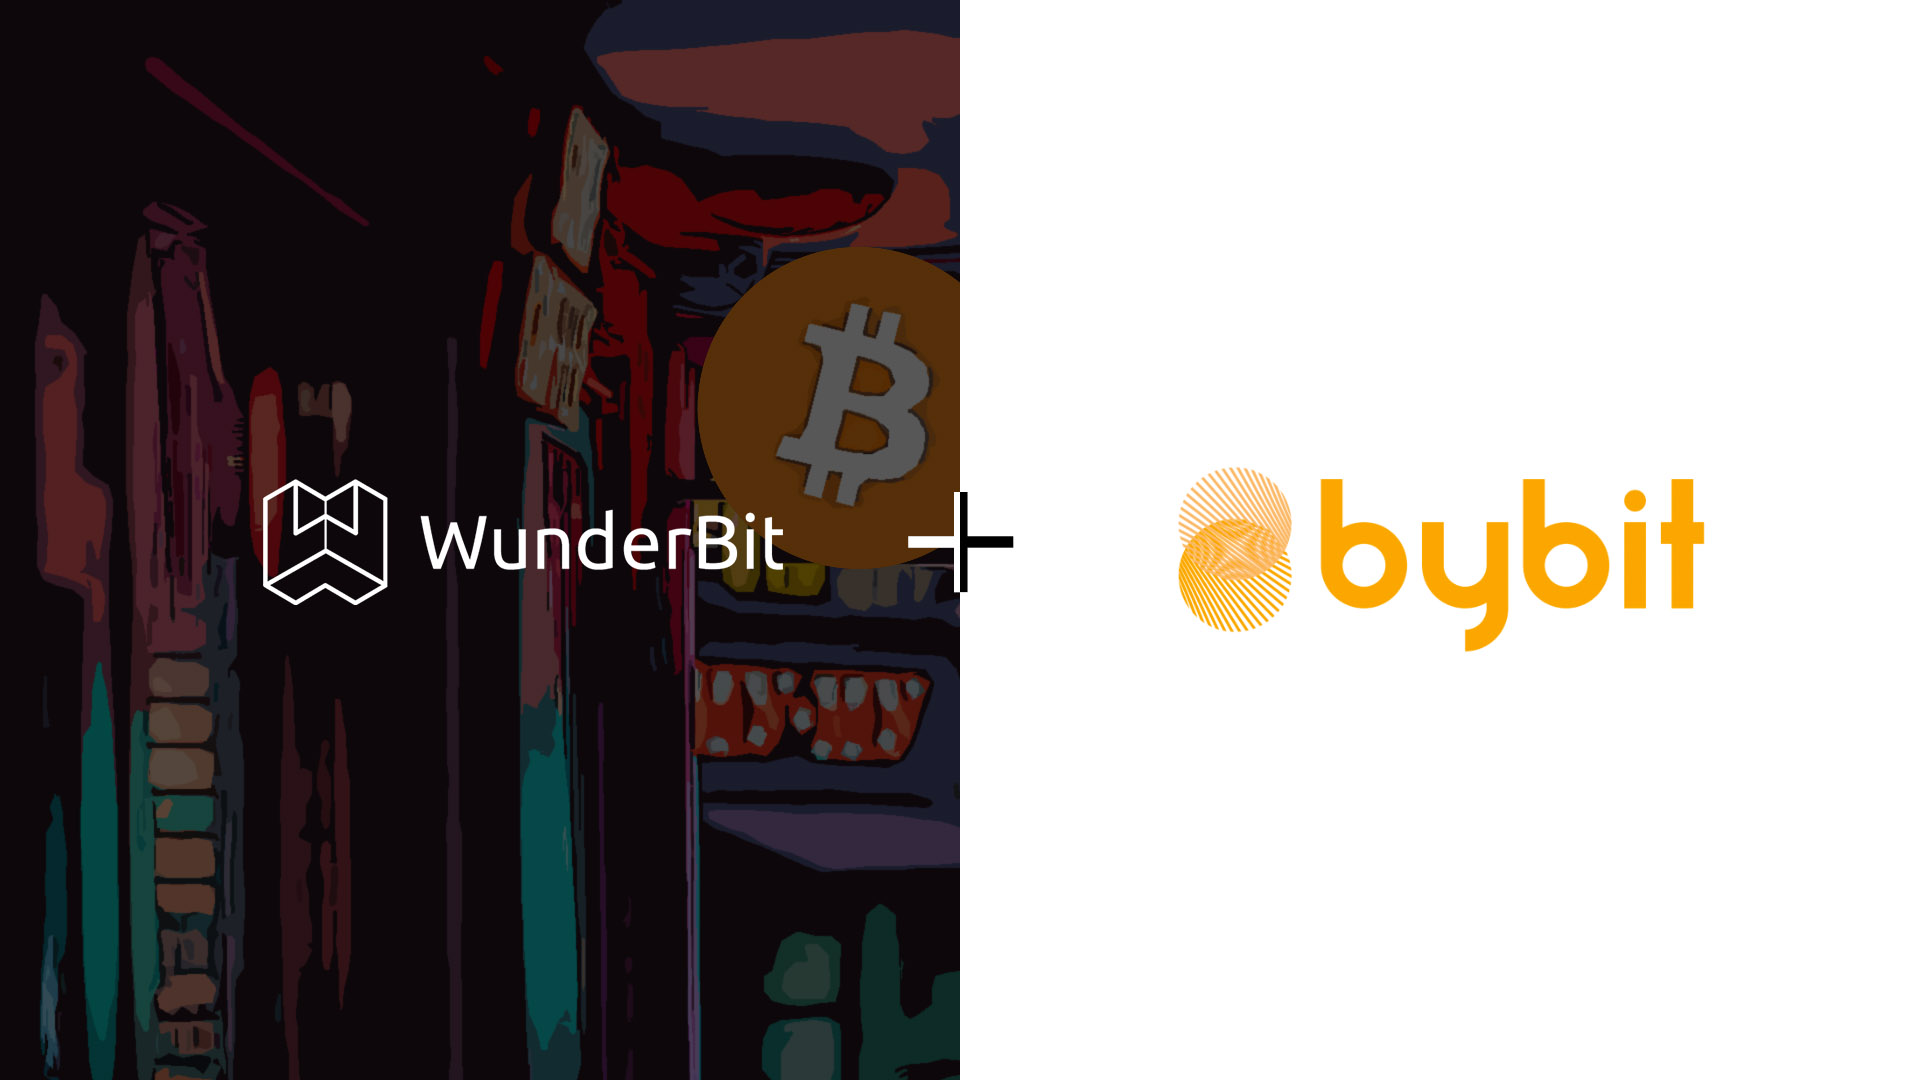 ByBit Users Can Now Copy Trade And Use Bots with Wunderbit